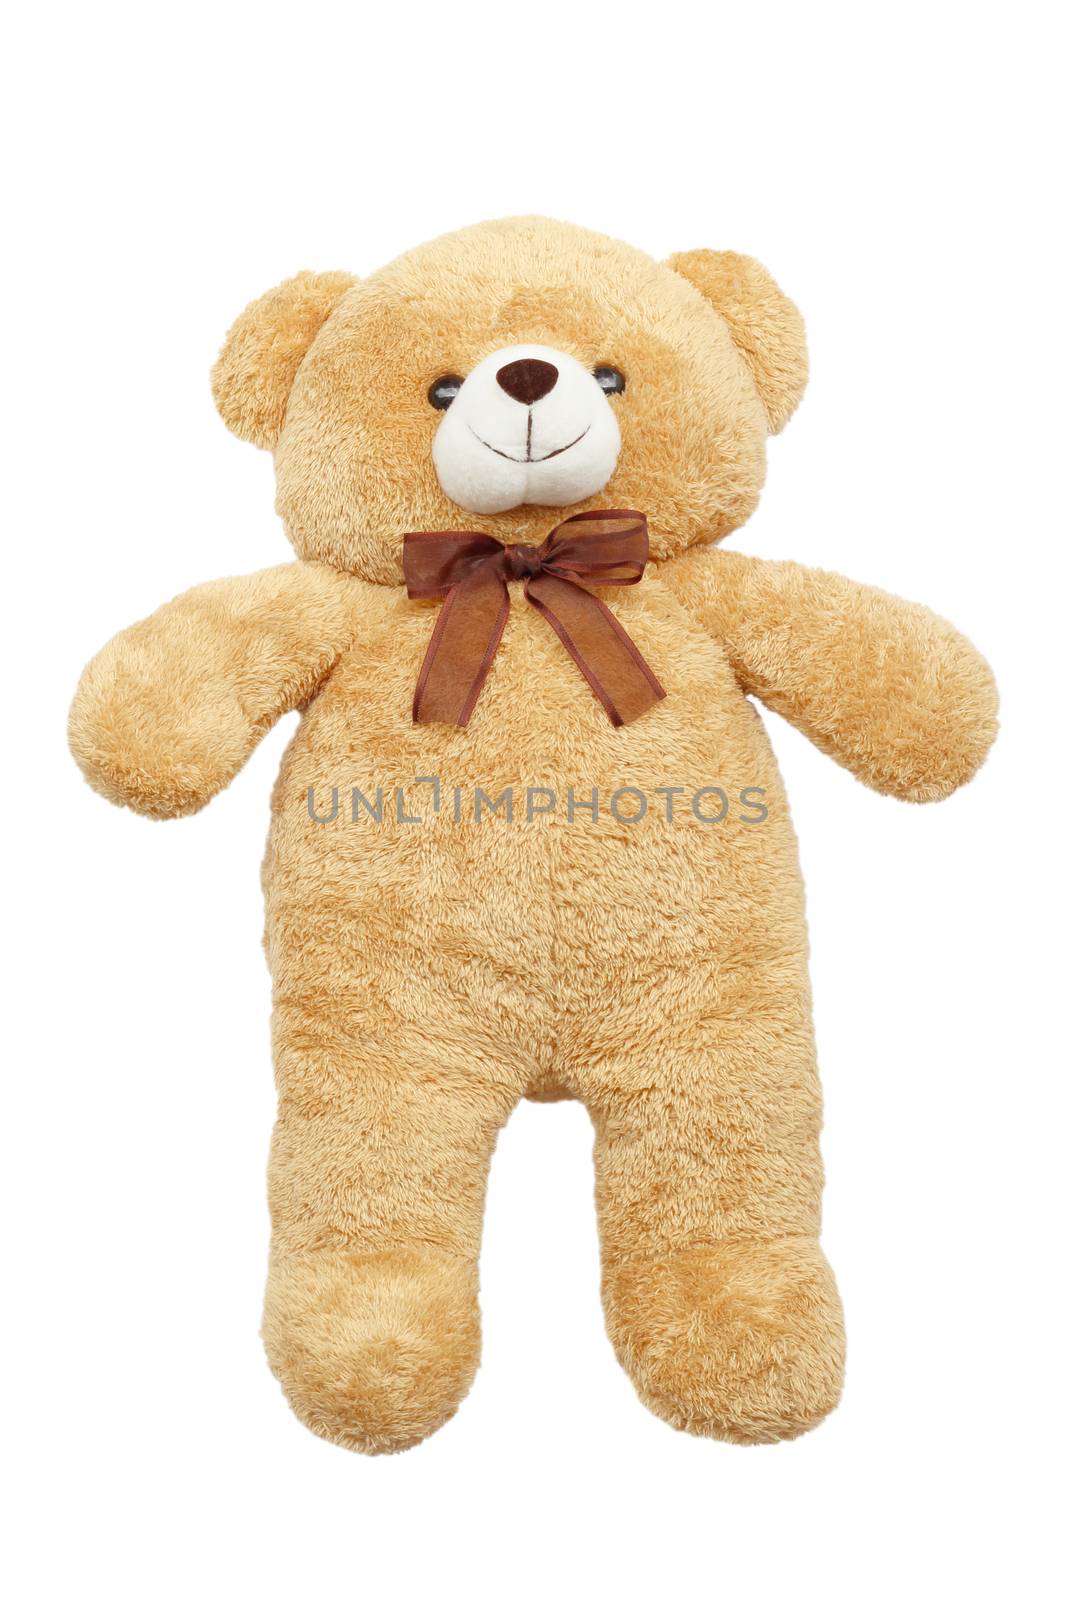 Image of toy teddy bear on white background by yod67